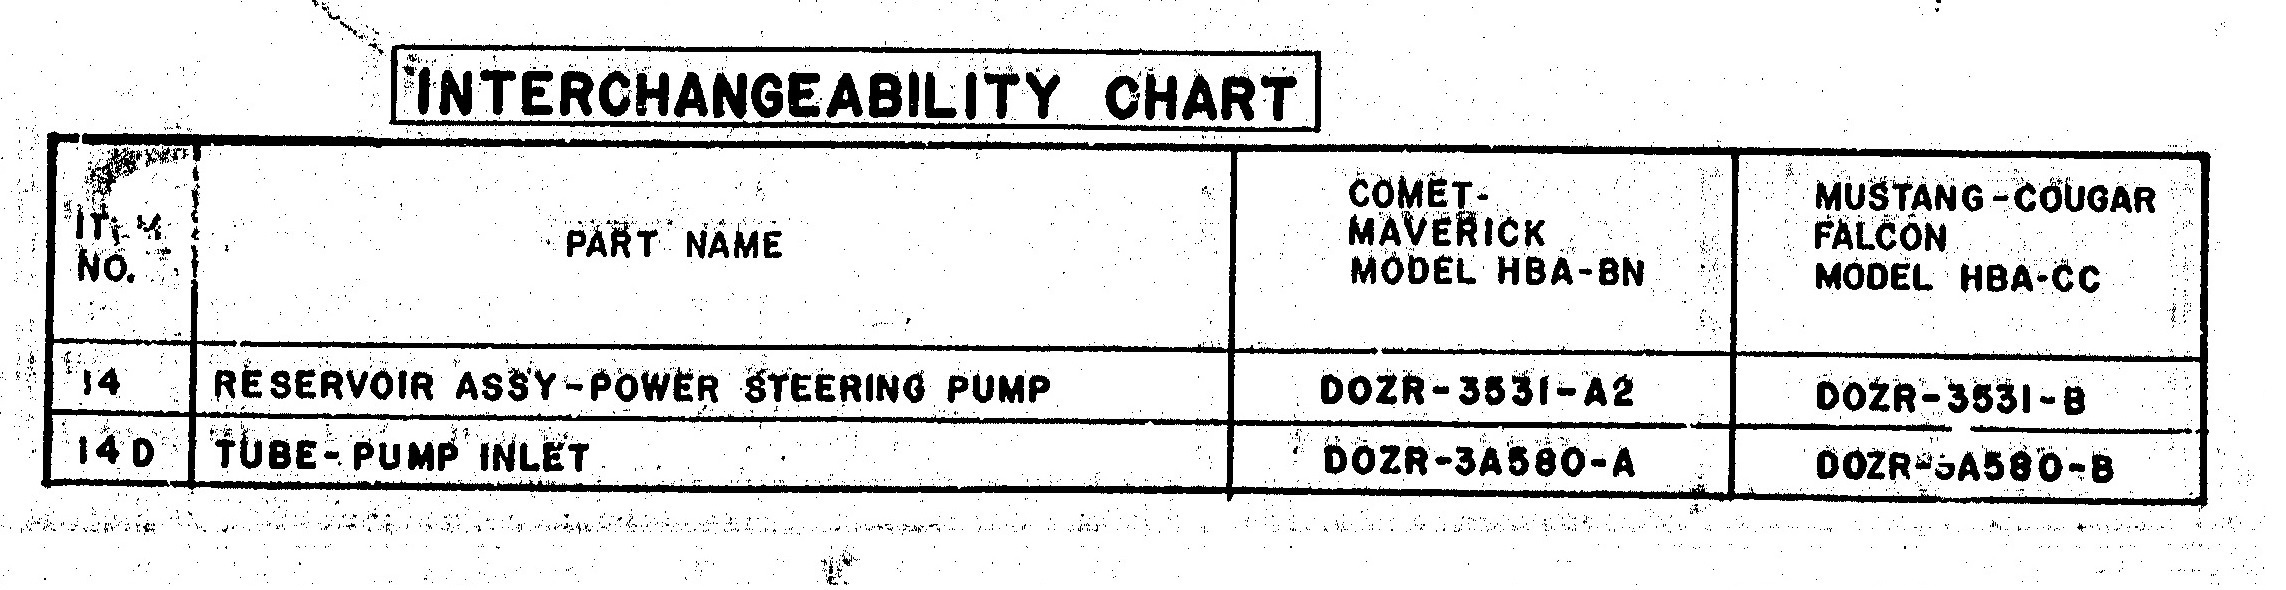 1970 Power Steering Pump difference